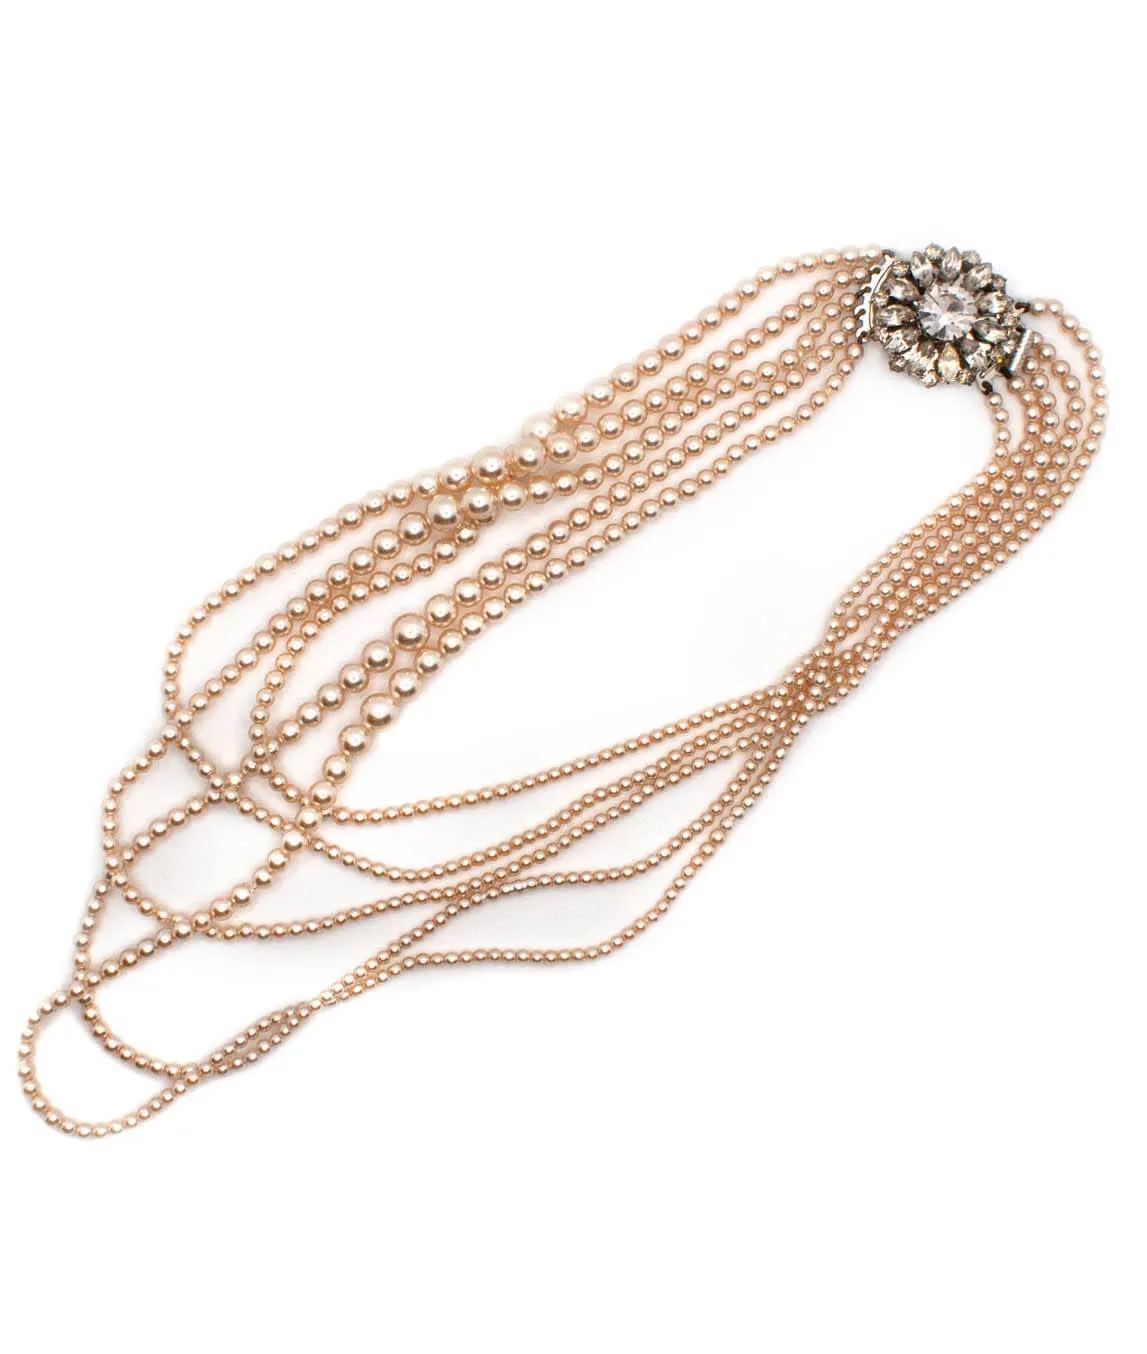 Vintage multi-strand imitation pearl necklace from the 1950s